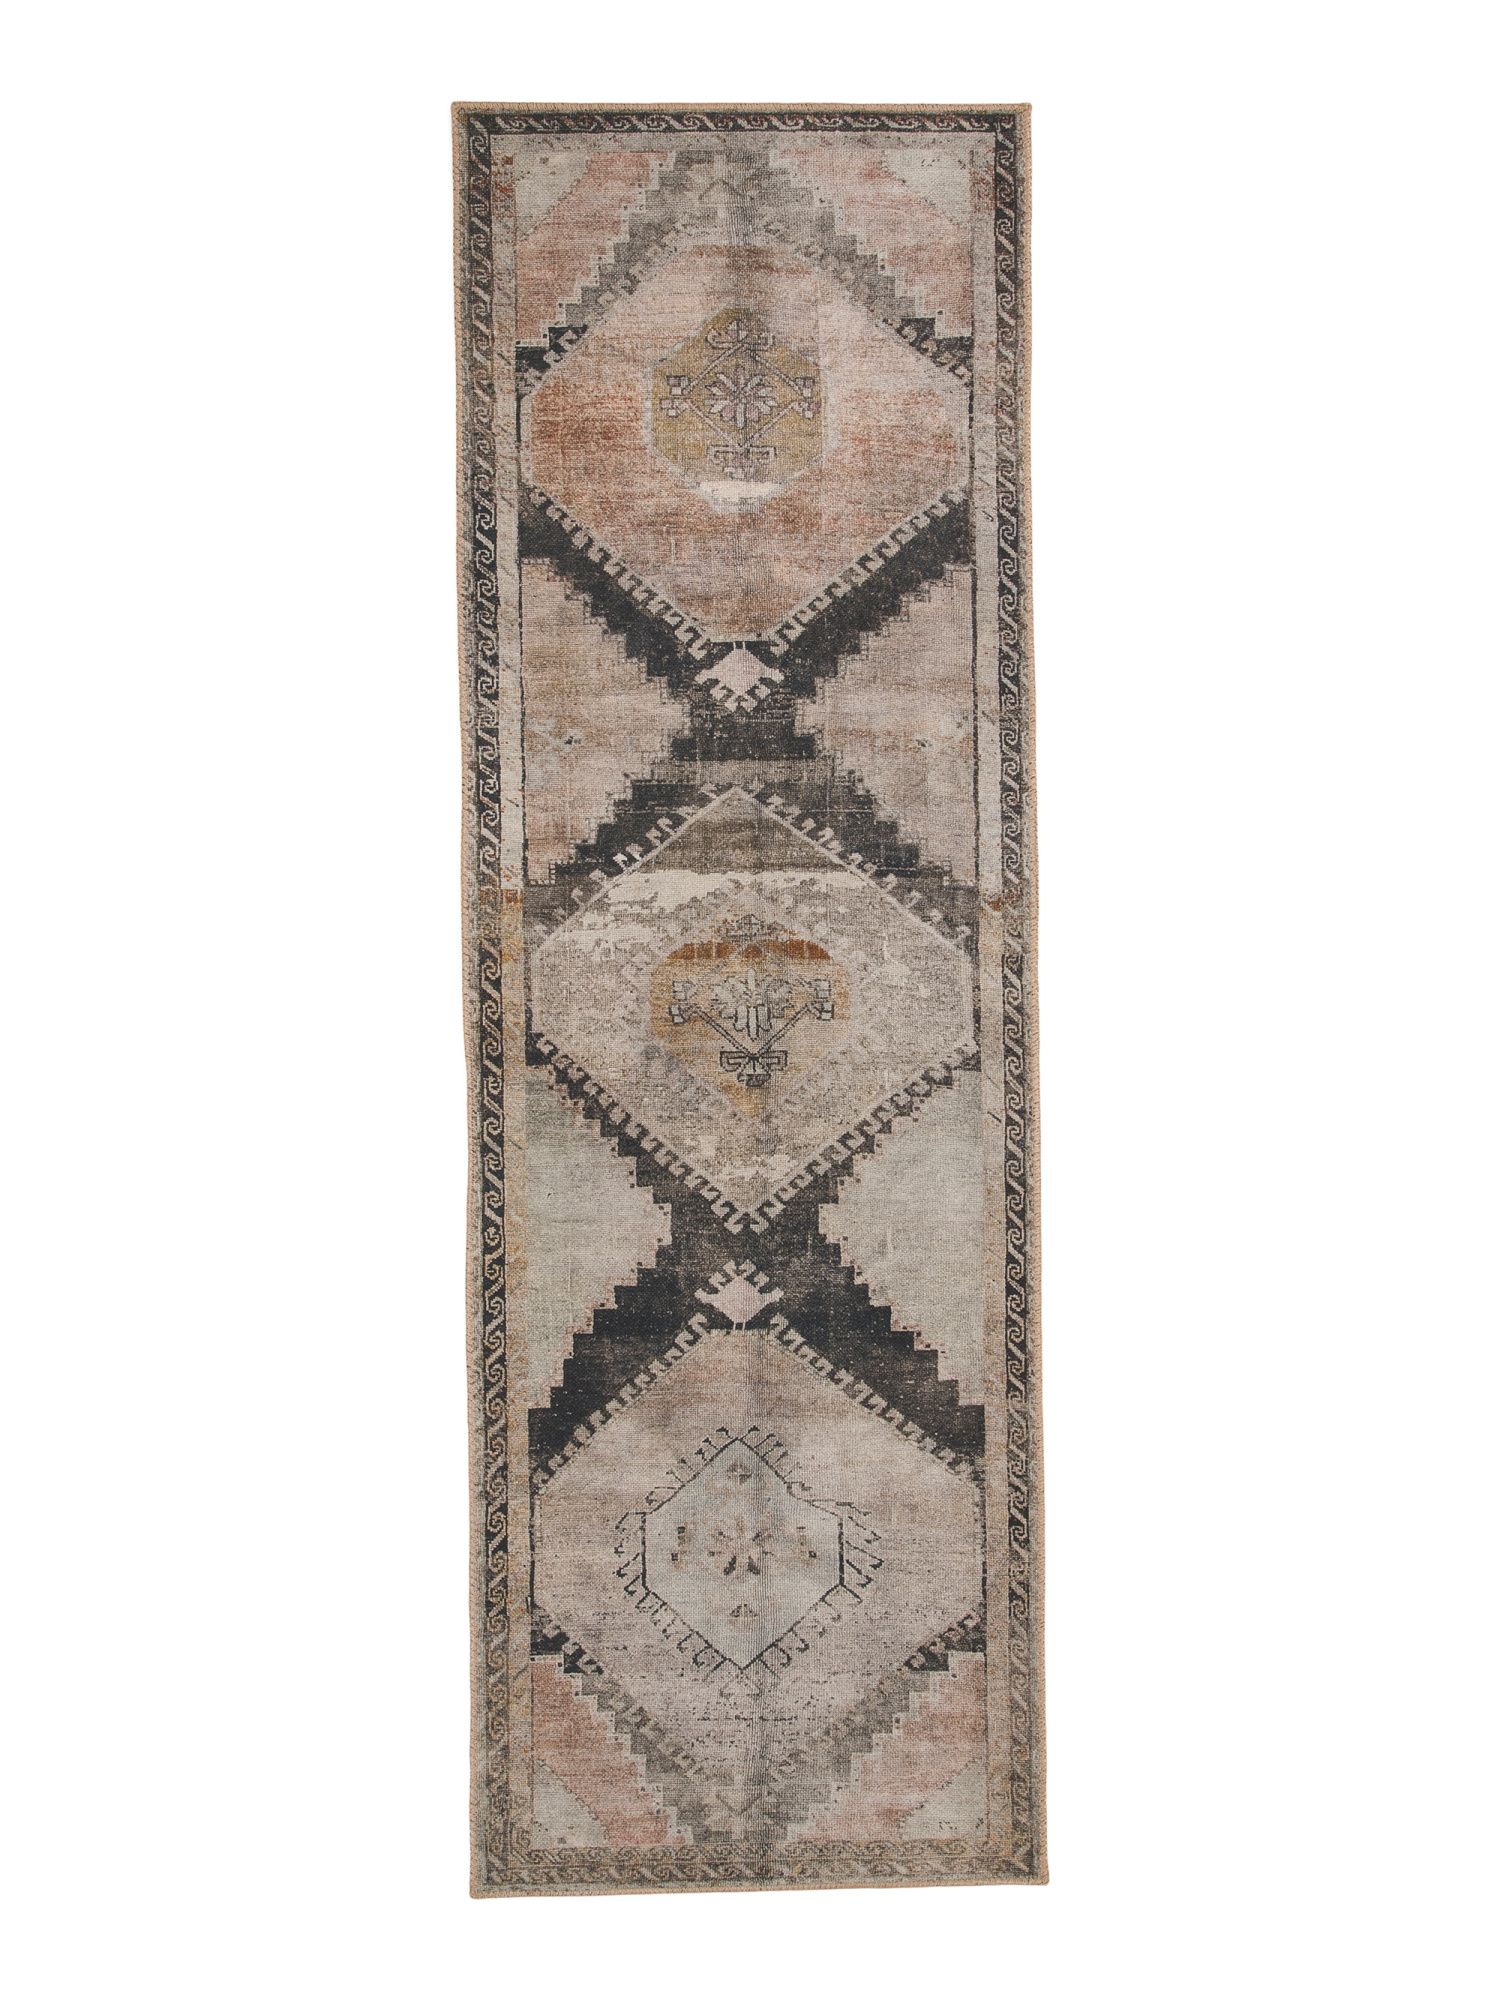 Made In Egypt Vintage Look Flat Weave Runner | TJ Maxx